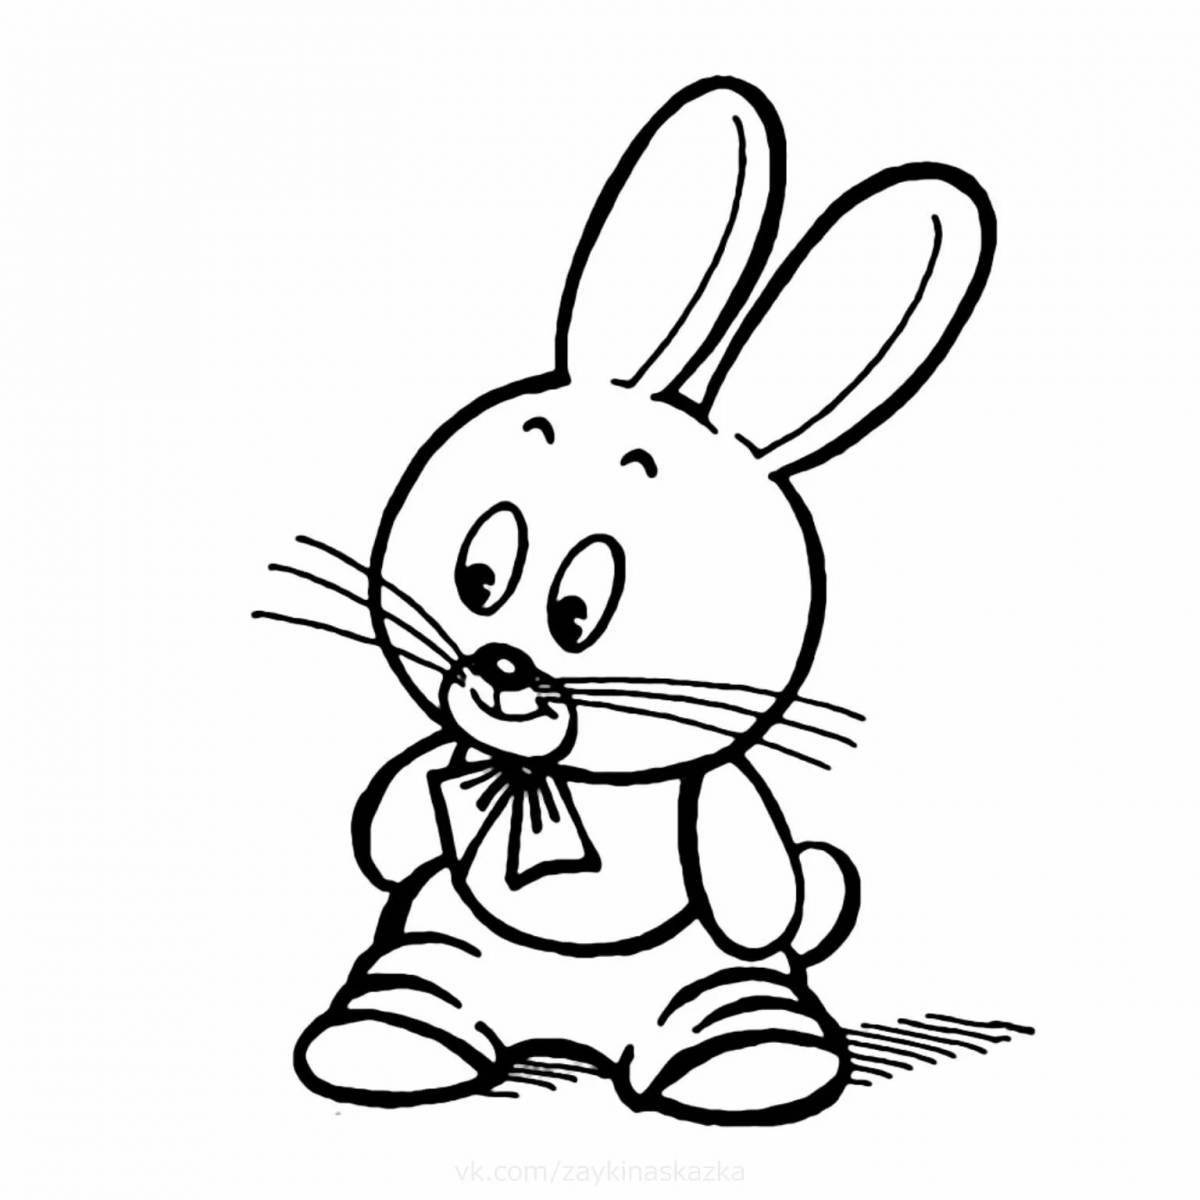 Coloring cute rabbit toy